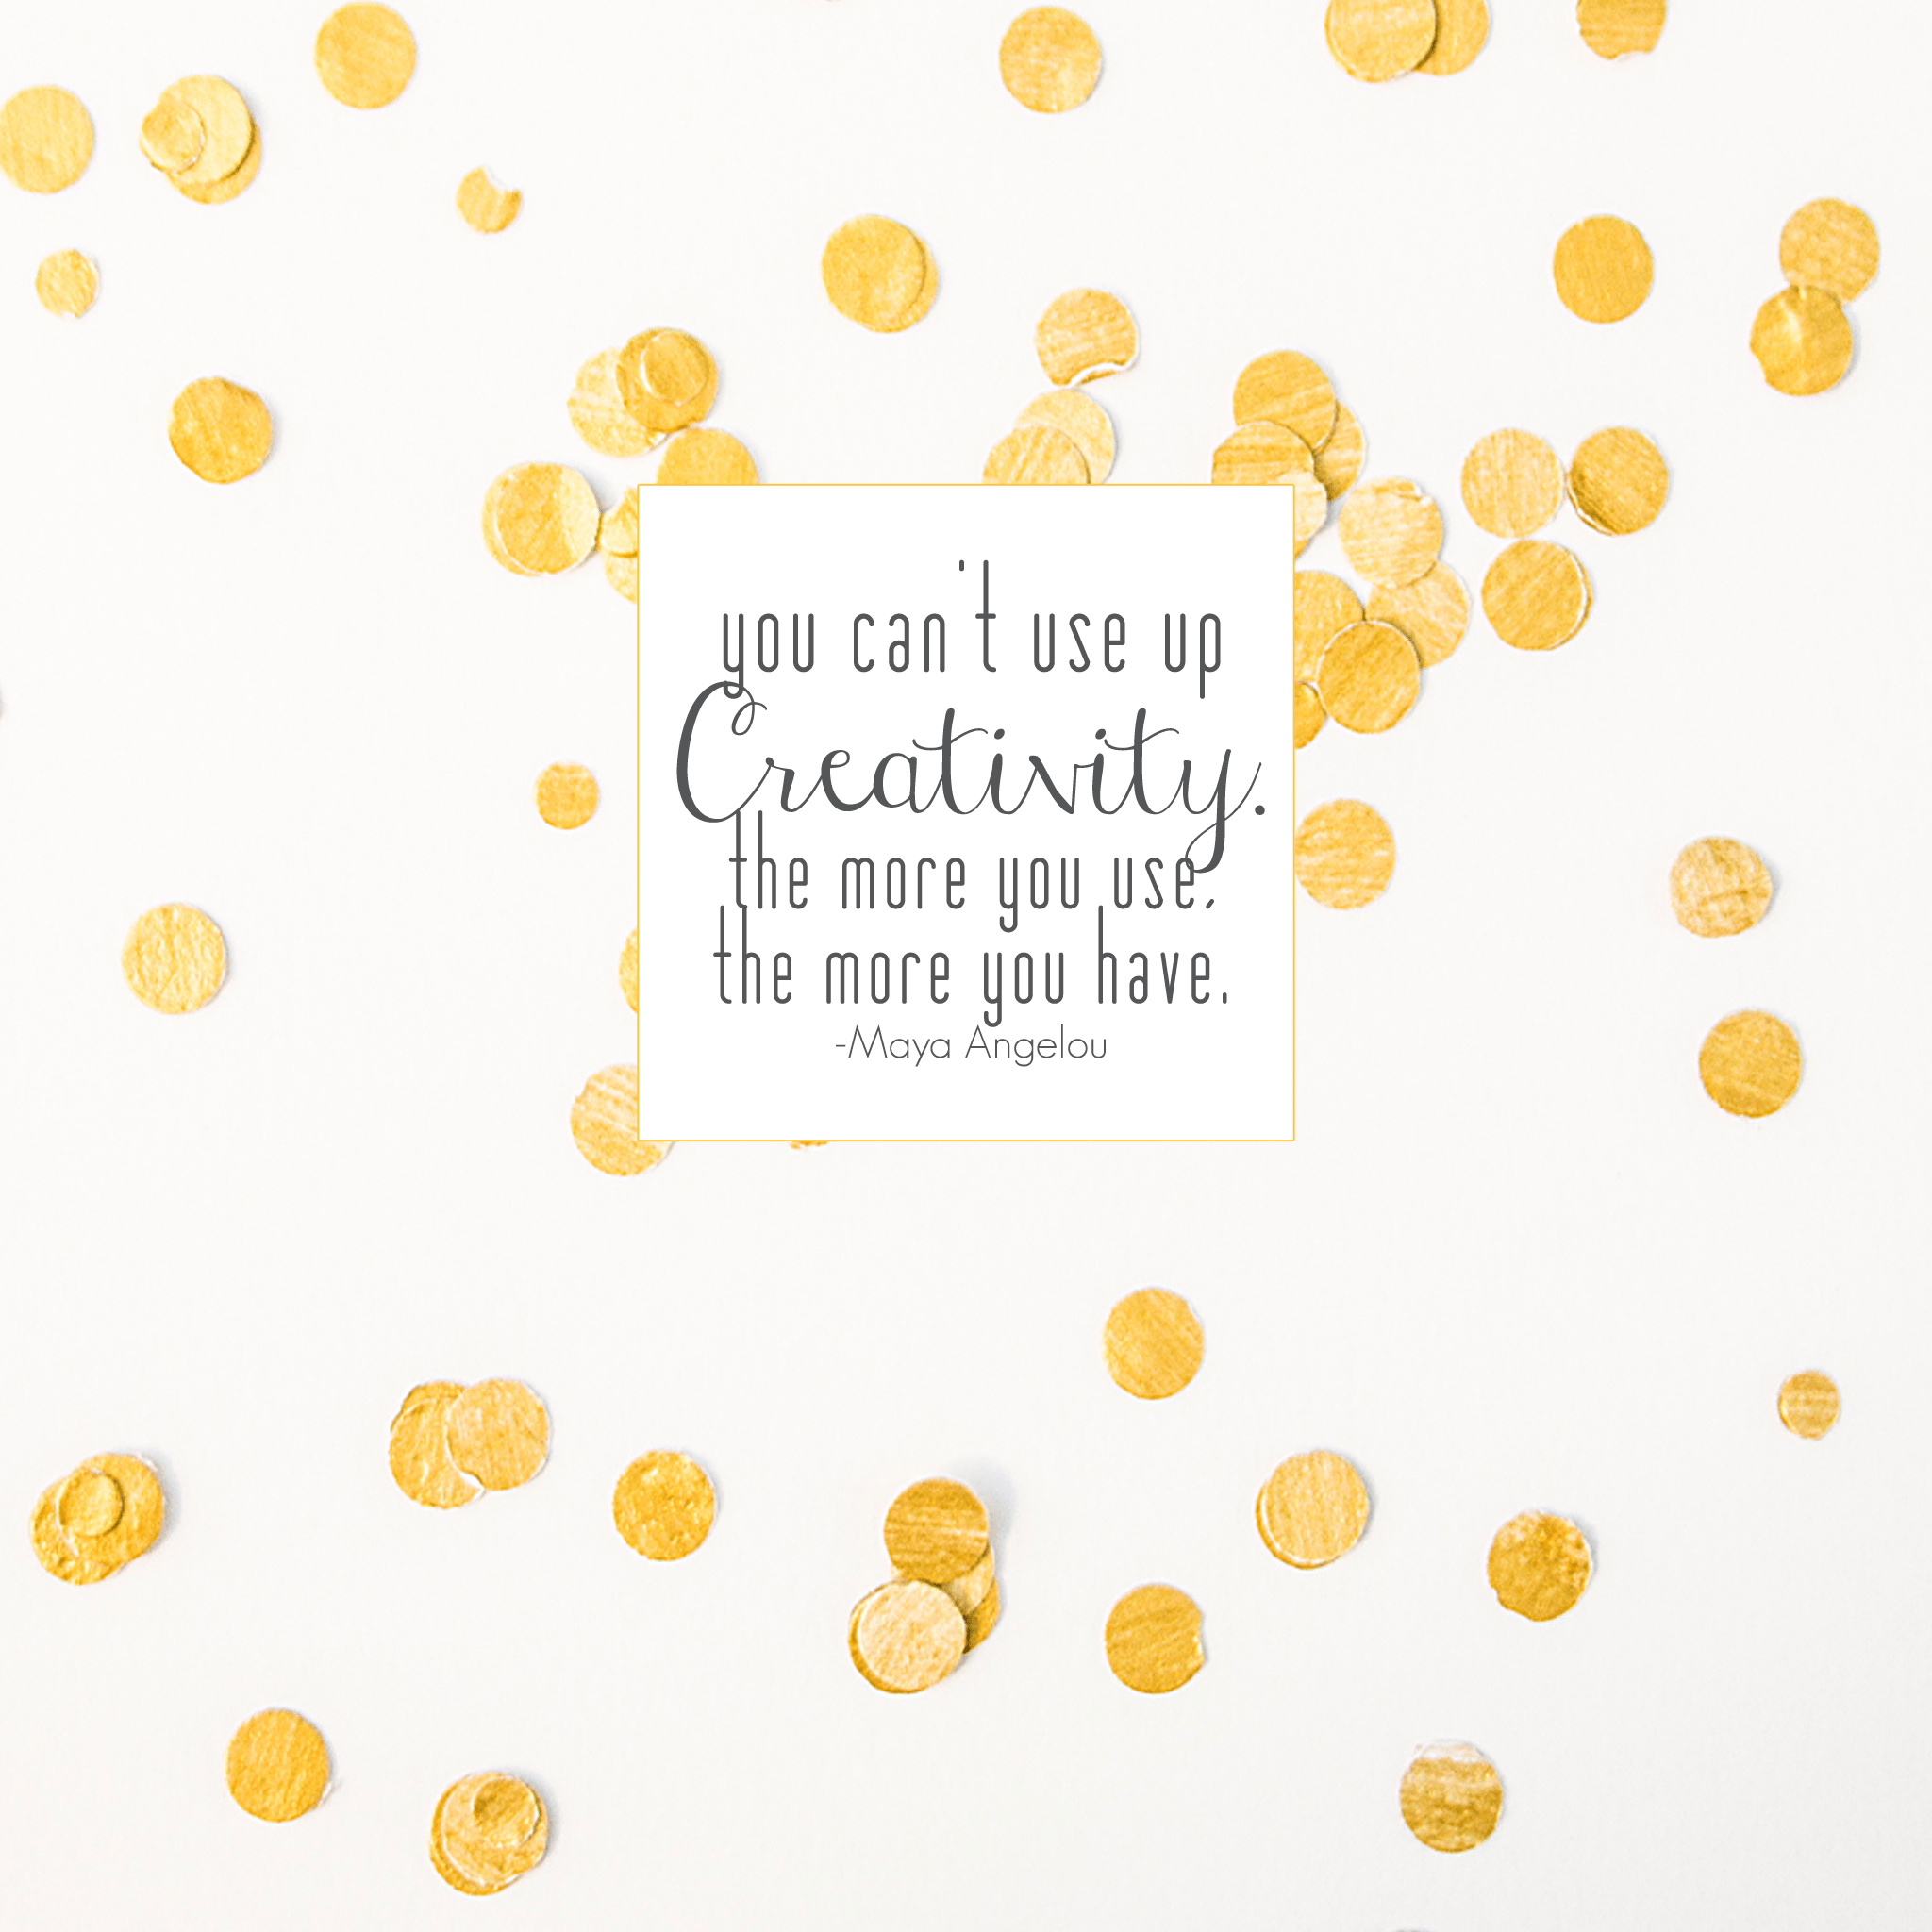 A white background with gold confetti and a quote that says 